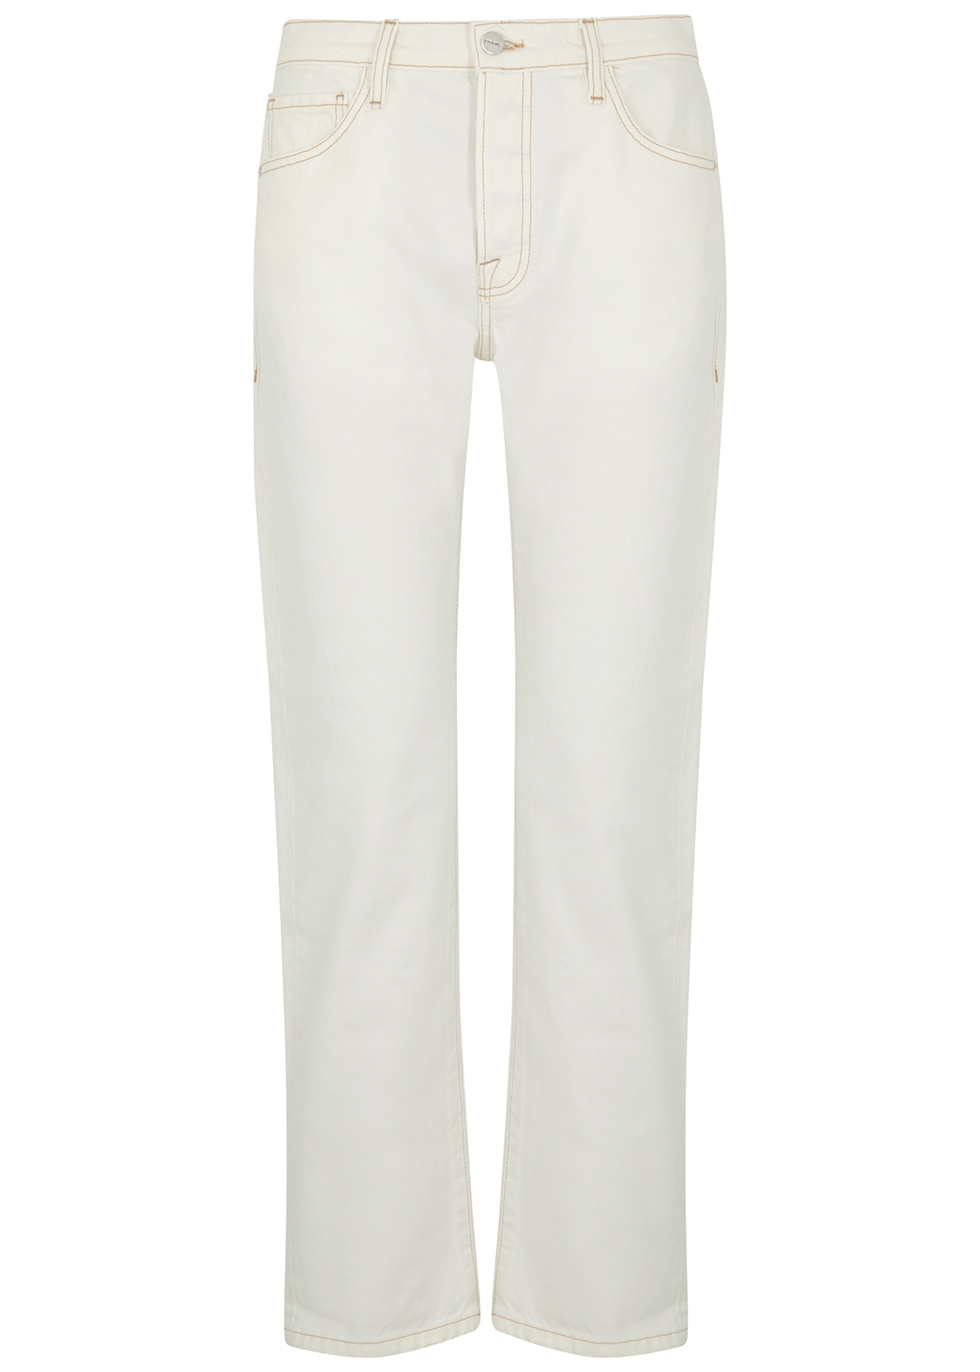 Shop Now For The Le Slouch ecru straight-leg jeans | AccuWeather Shop